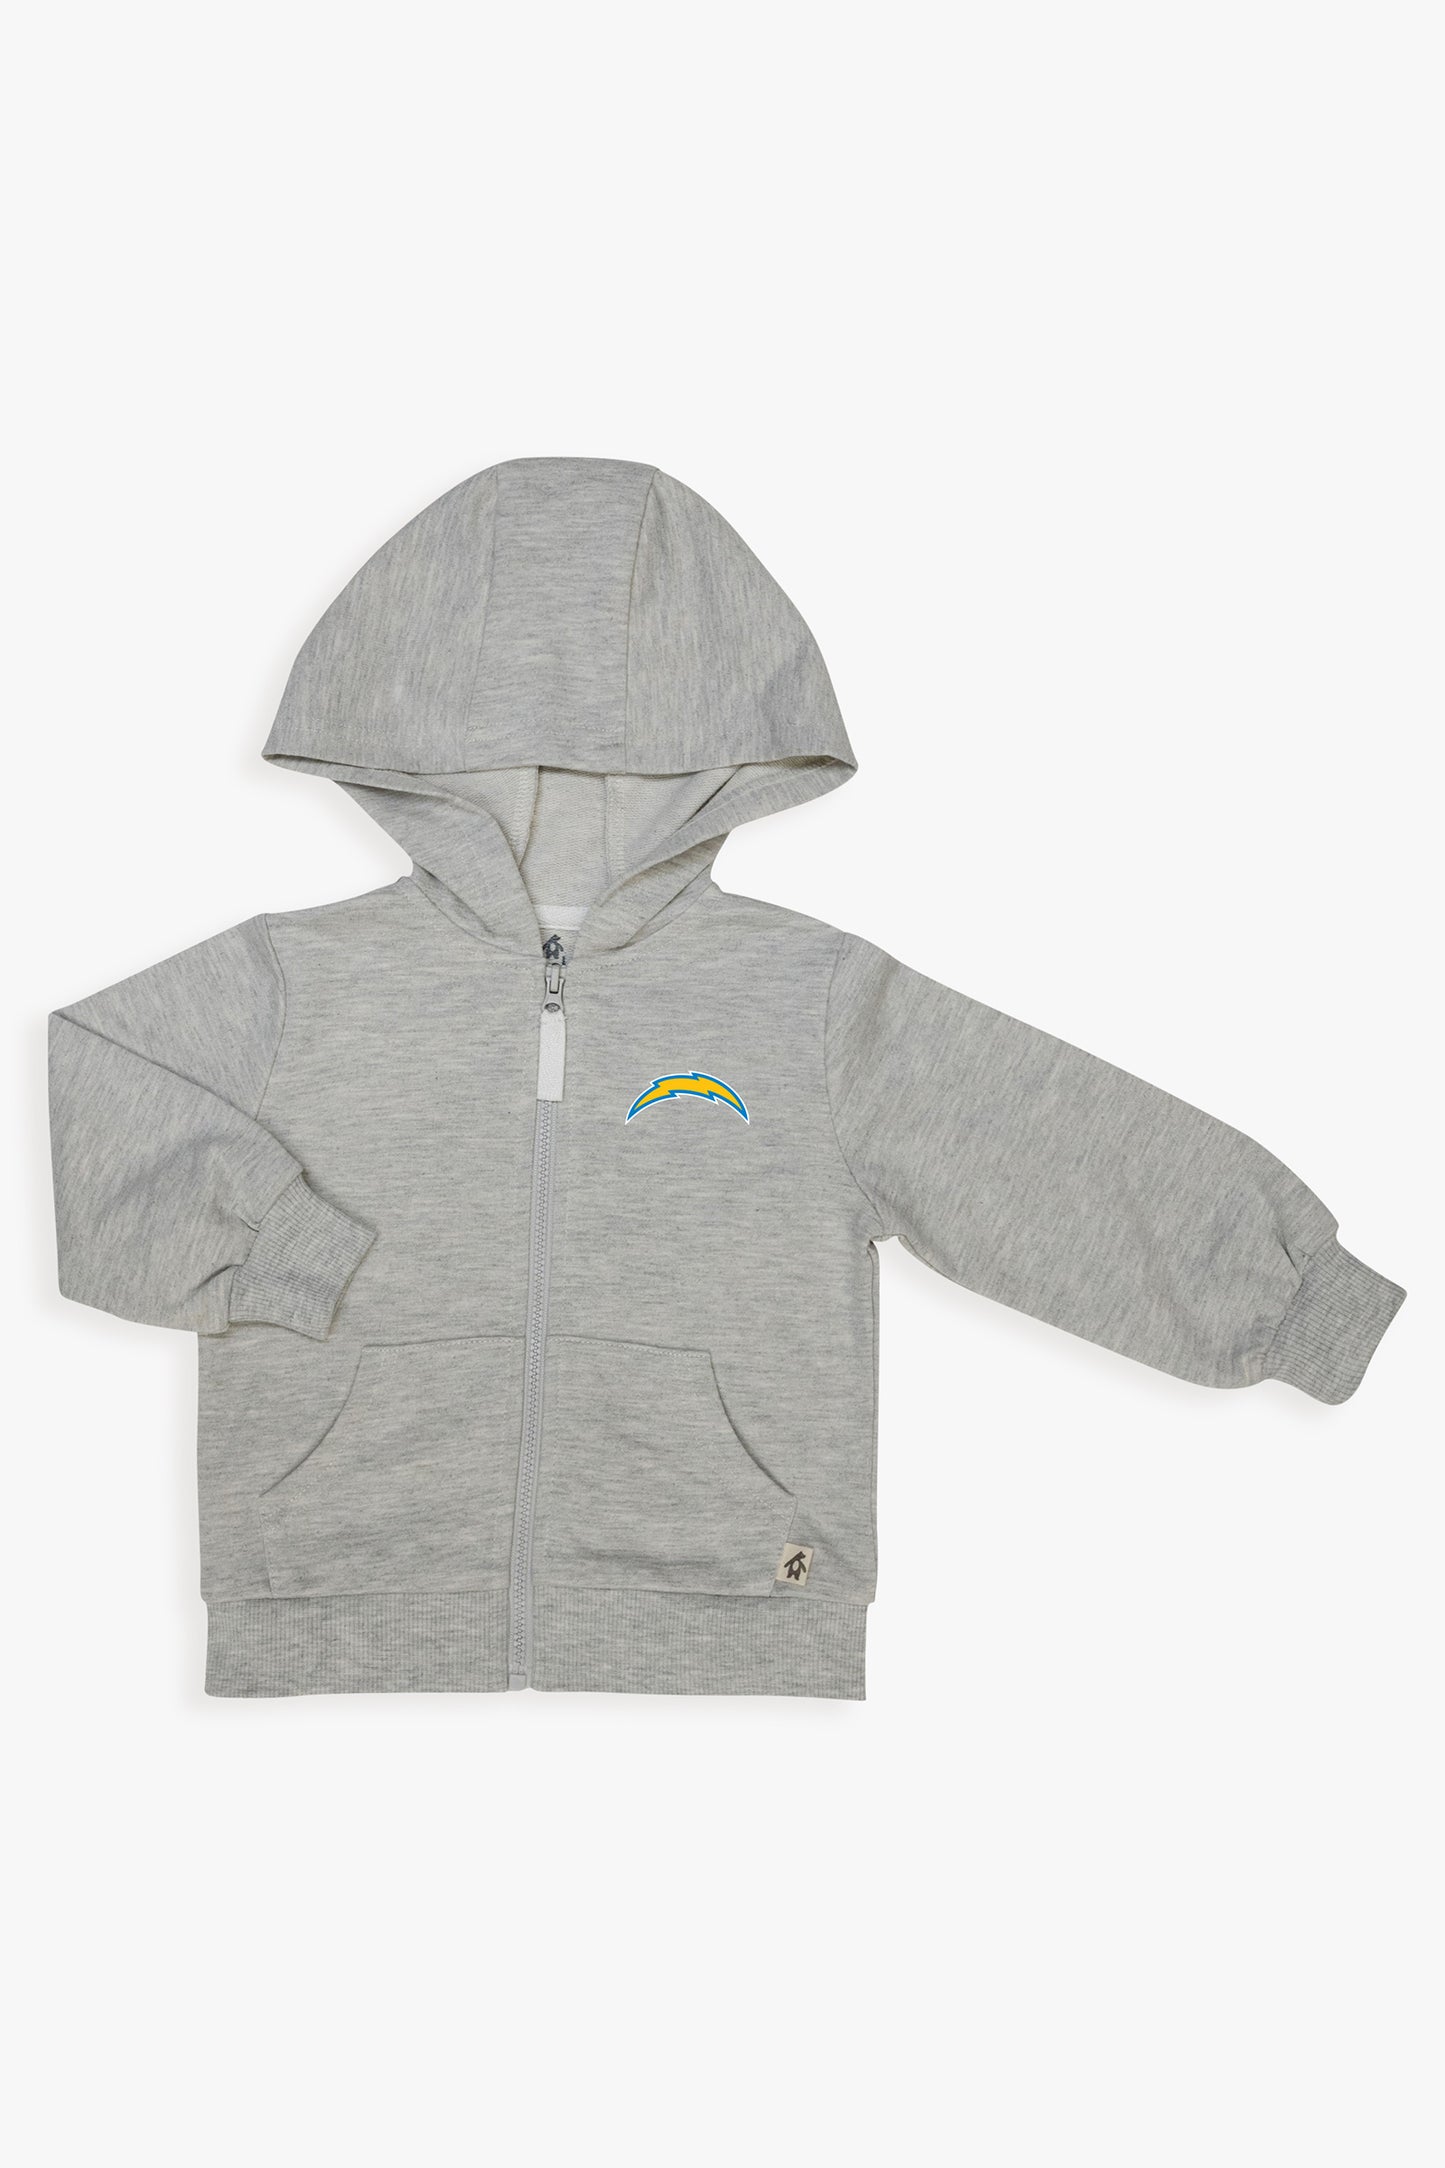 NFL Toddler Unisex Grey French Terry Zip-Up Hoodie